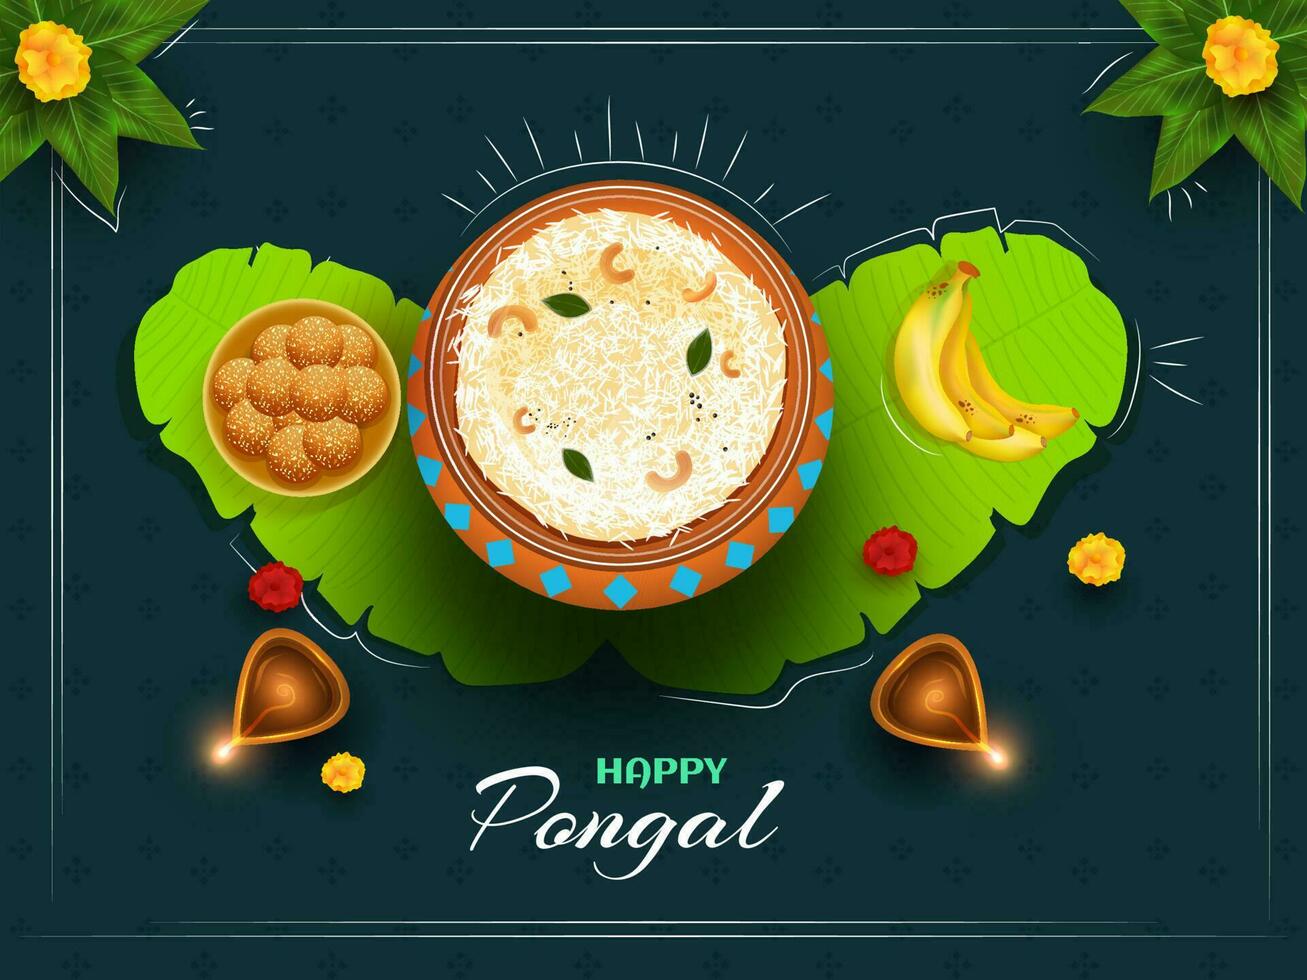 Happy Pongal celebration greeting card design with top view of rice mud pot, sweet, banana leaves and illuminated oil lamp on green background. vector